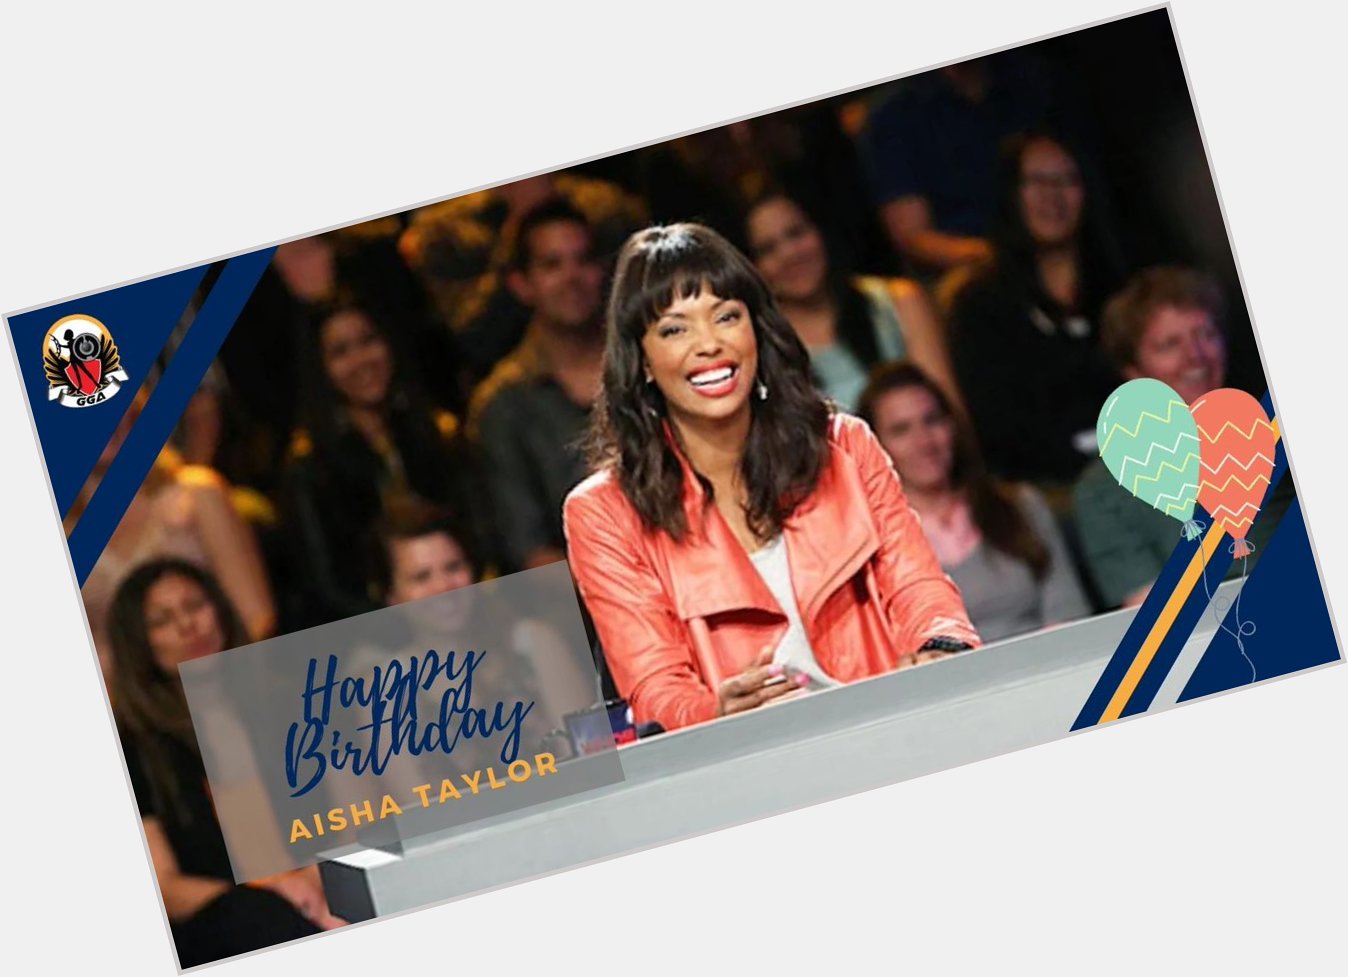 Happy Birthday to one of the funniest people in show biz - Aisha Tyler!  